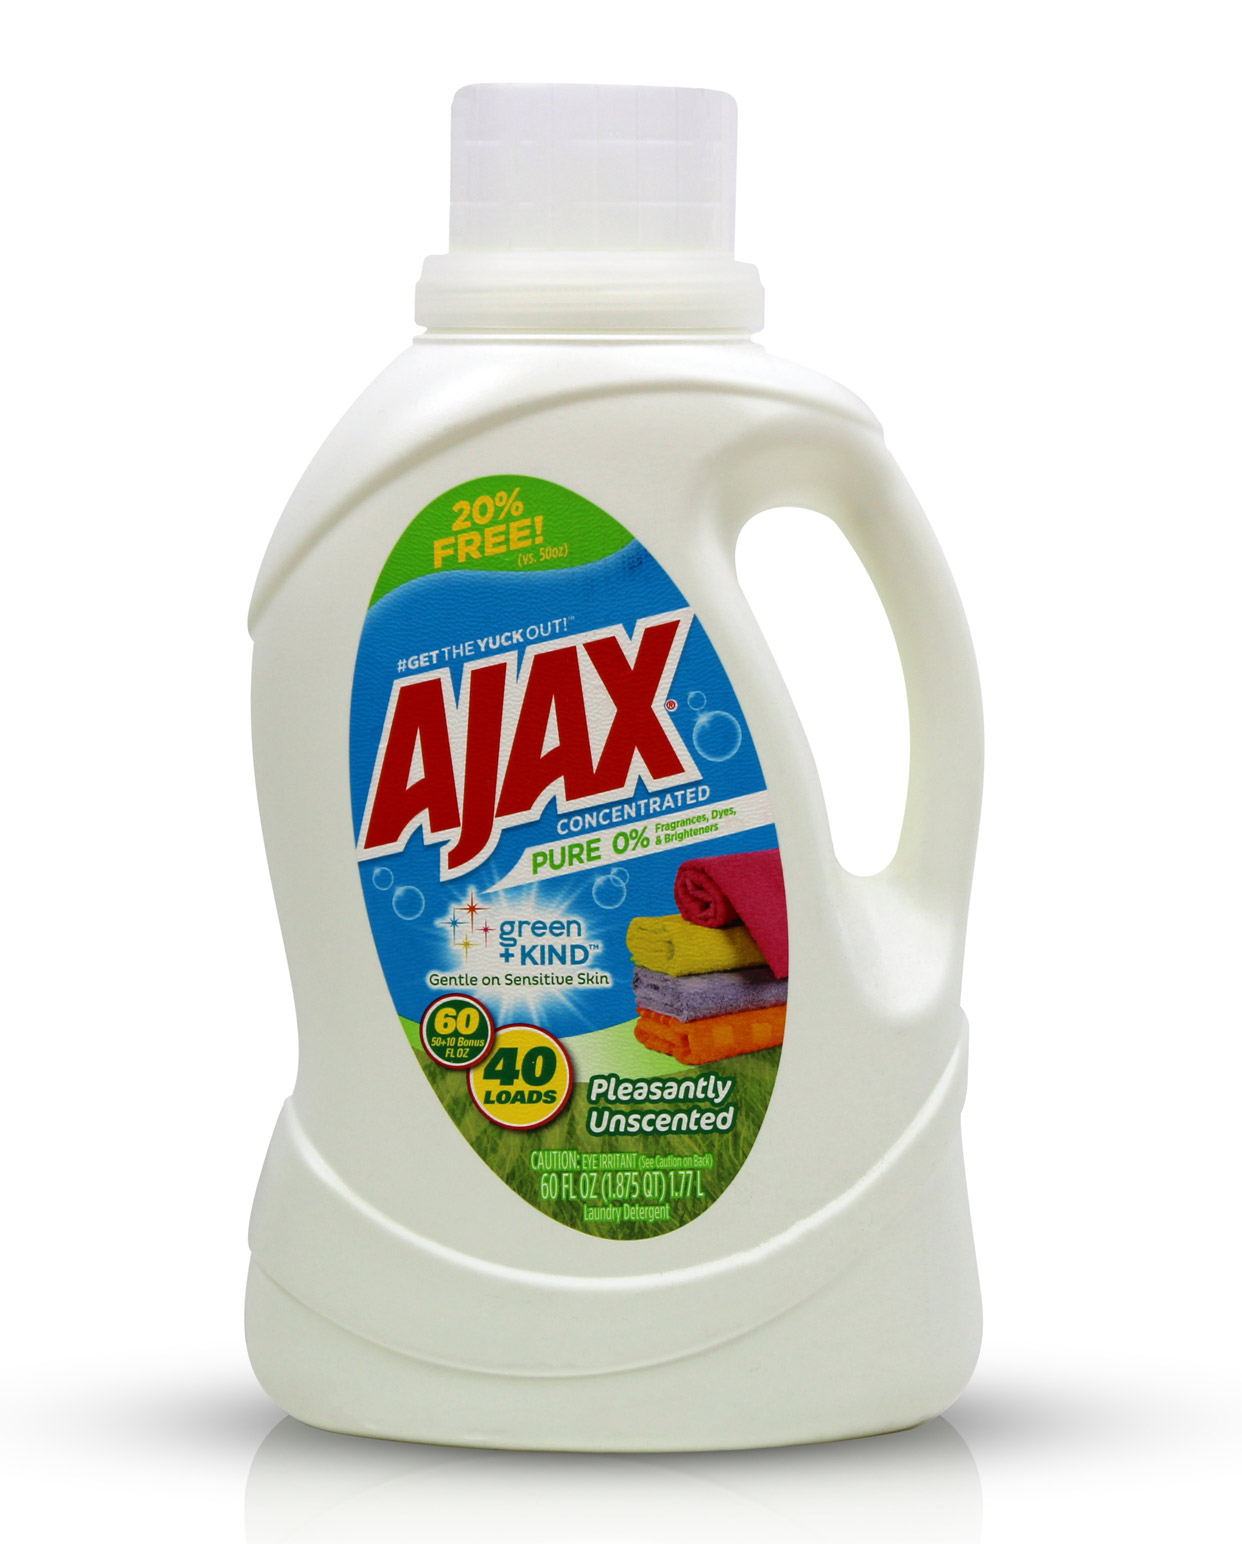 60oz bottle of AJAX Concentrated laundry detergent with a clear label.